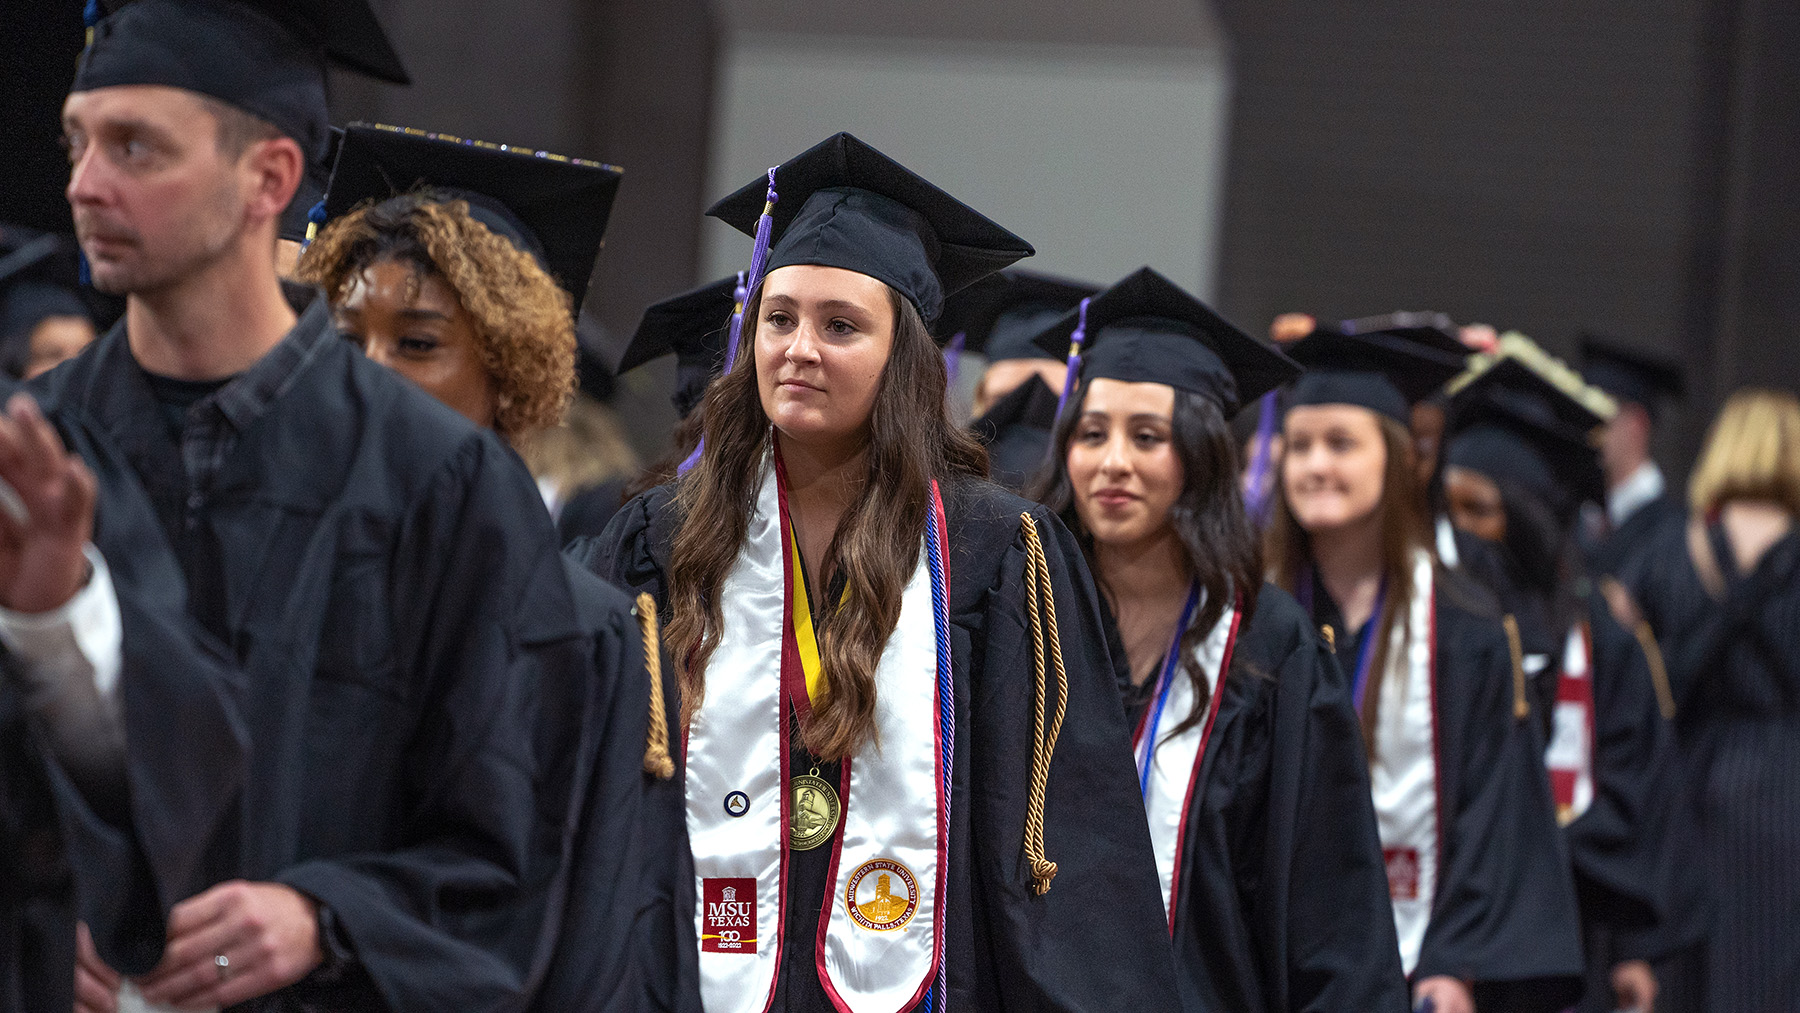 Graduate proudly wears medal at Spring 2022 graduation ceremony